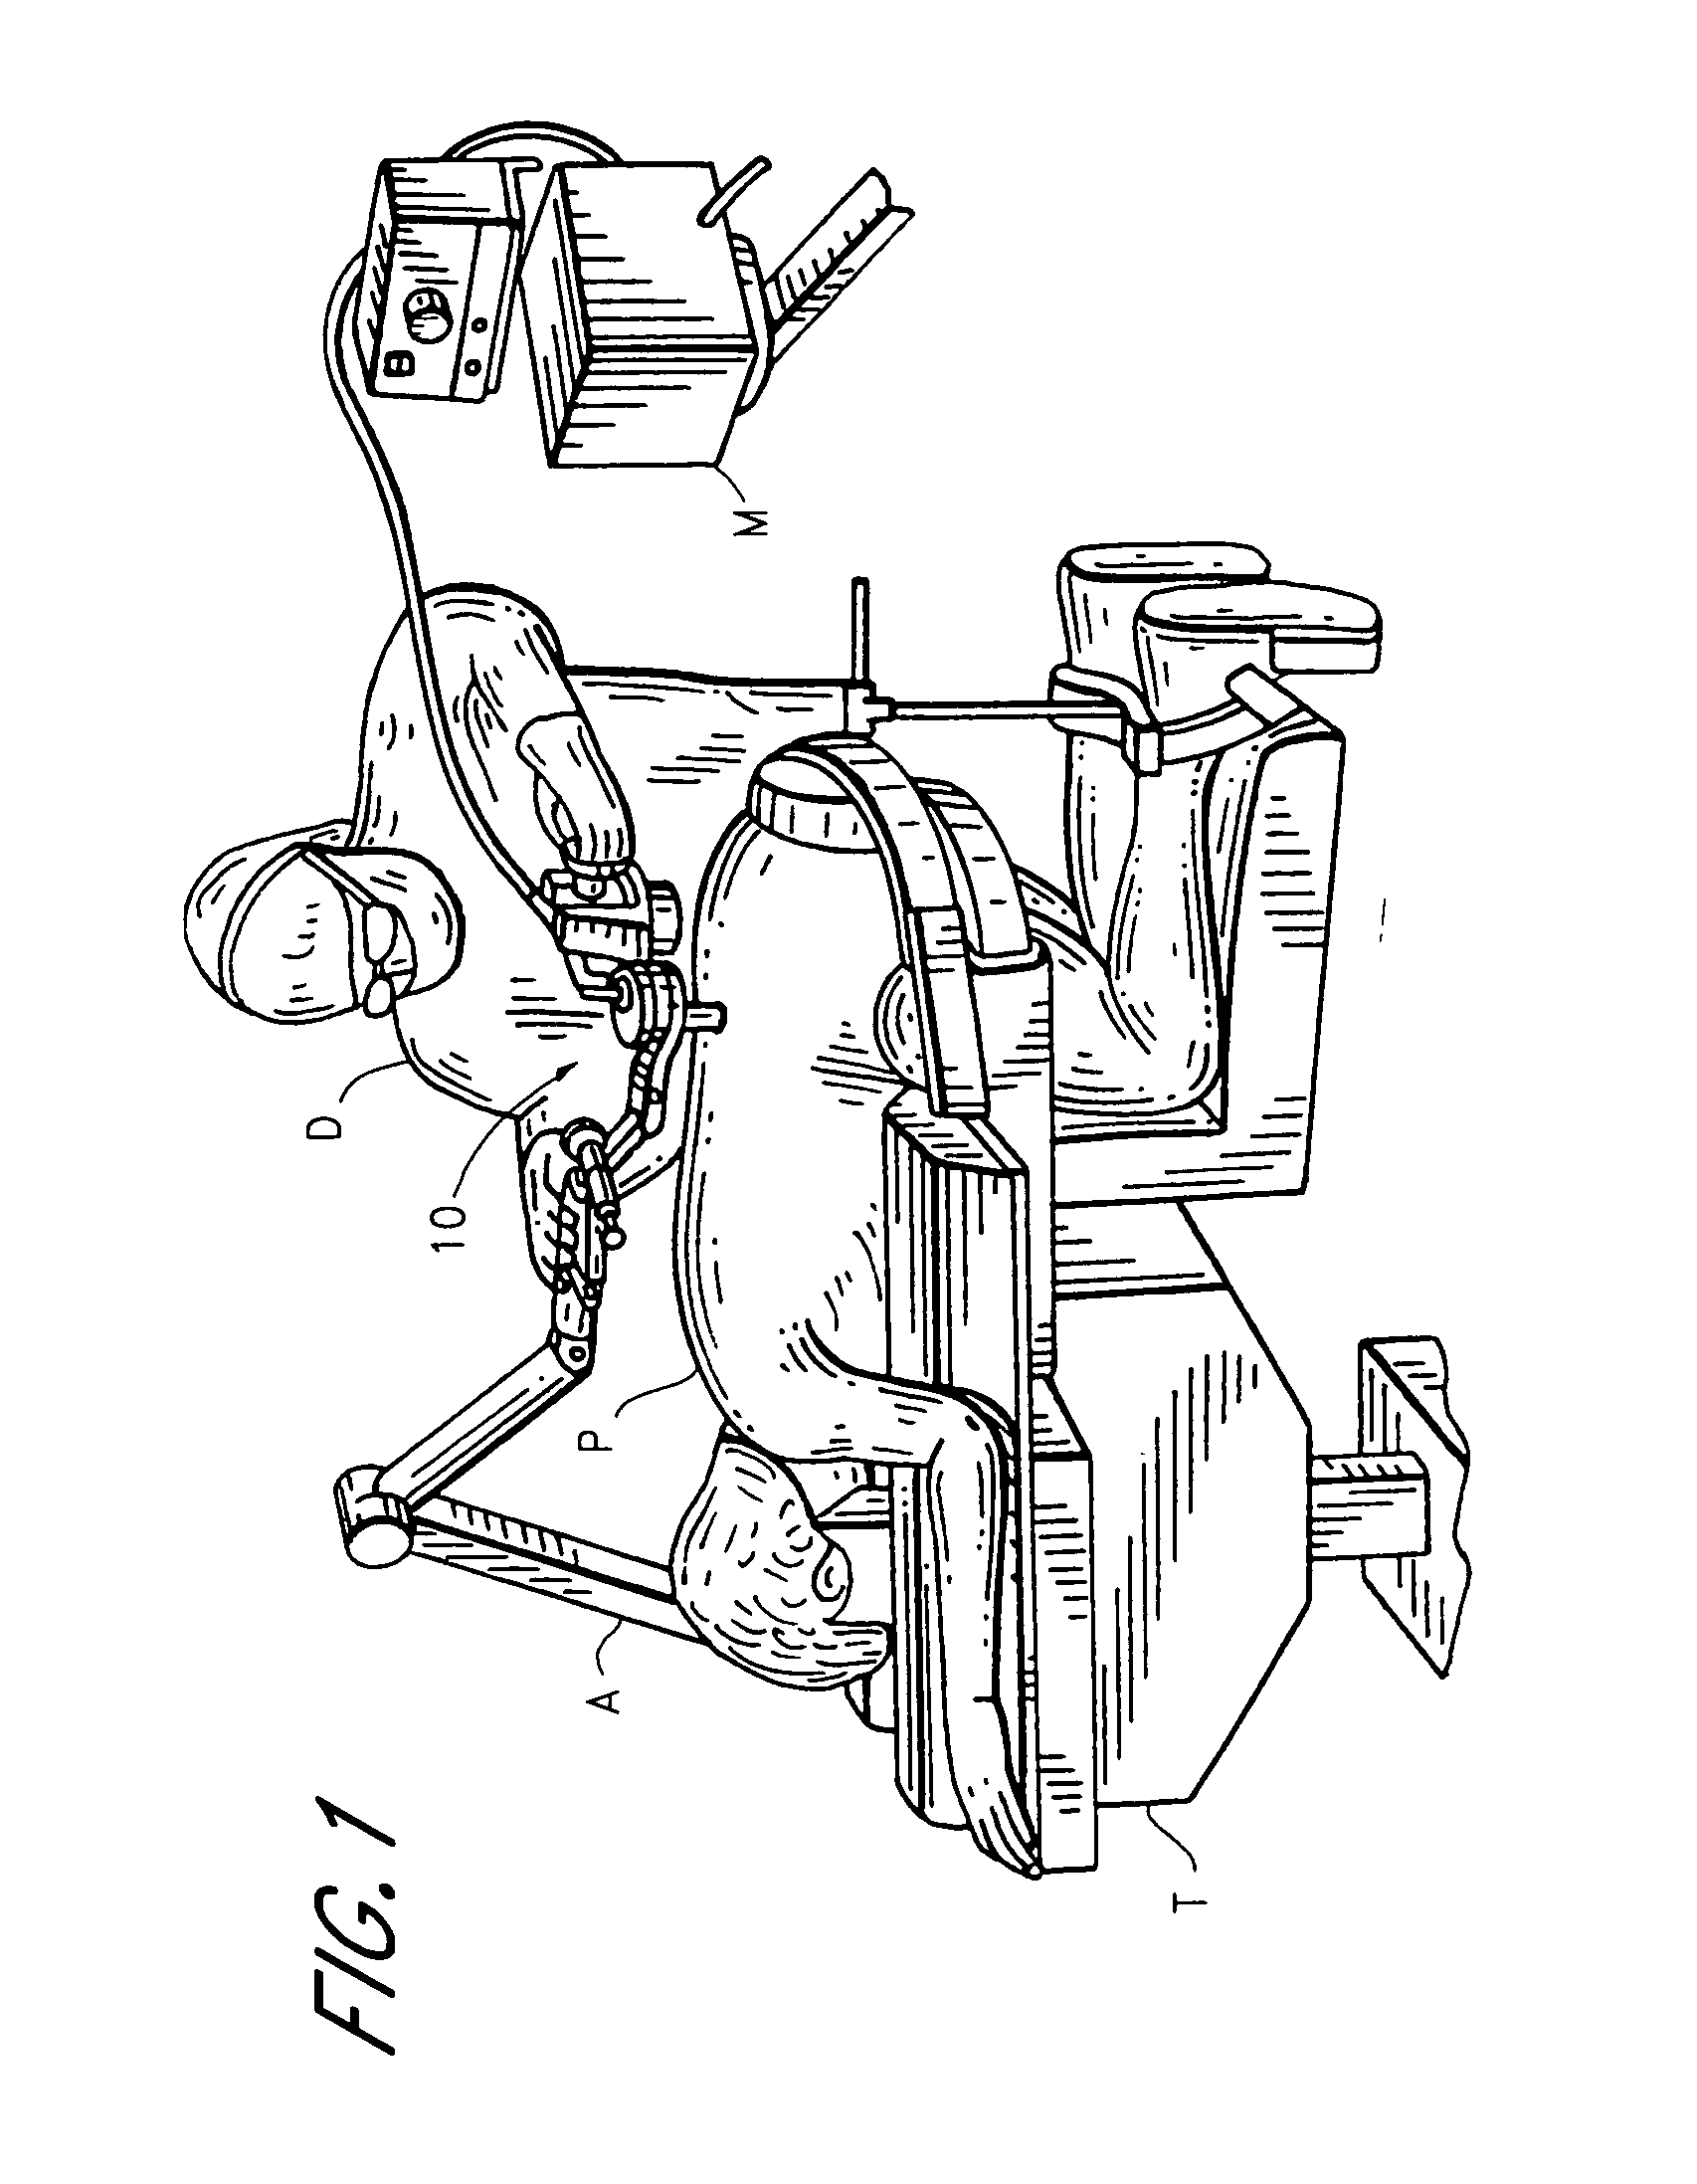 Methods and apparatuses for minimally invasive replacement of intervertebral discs